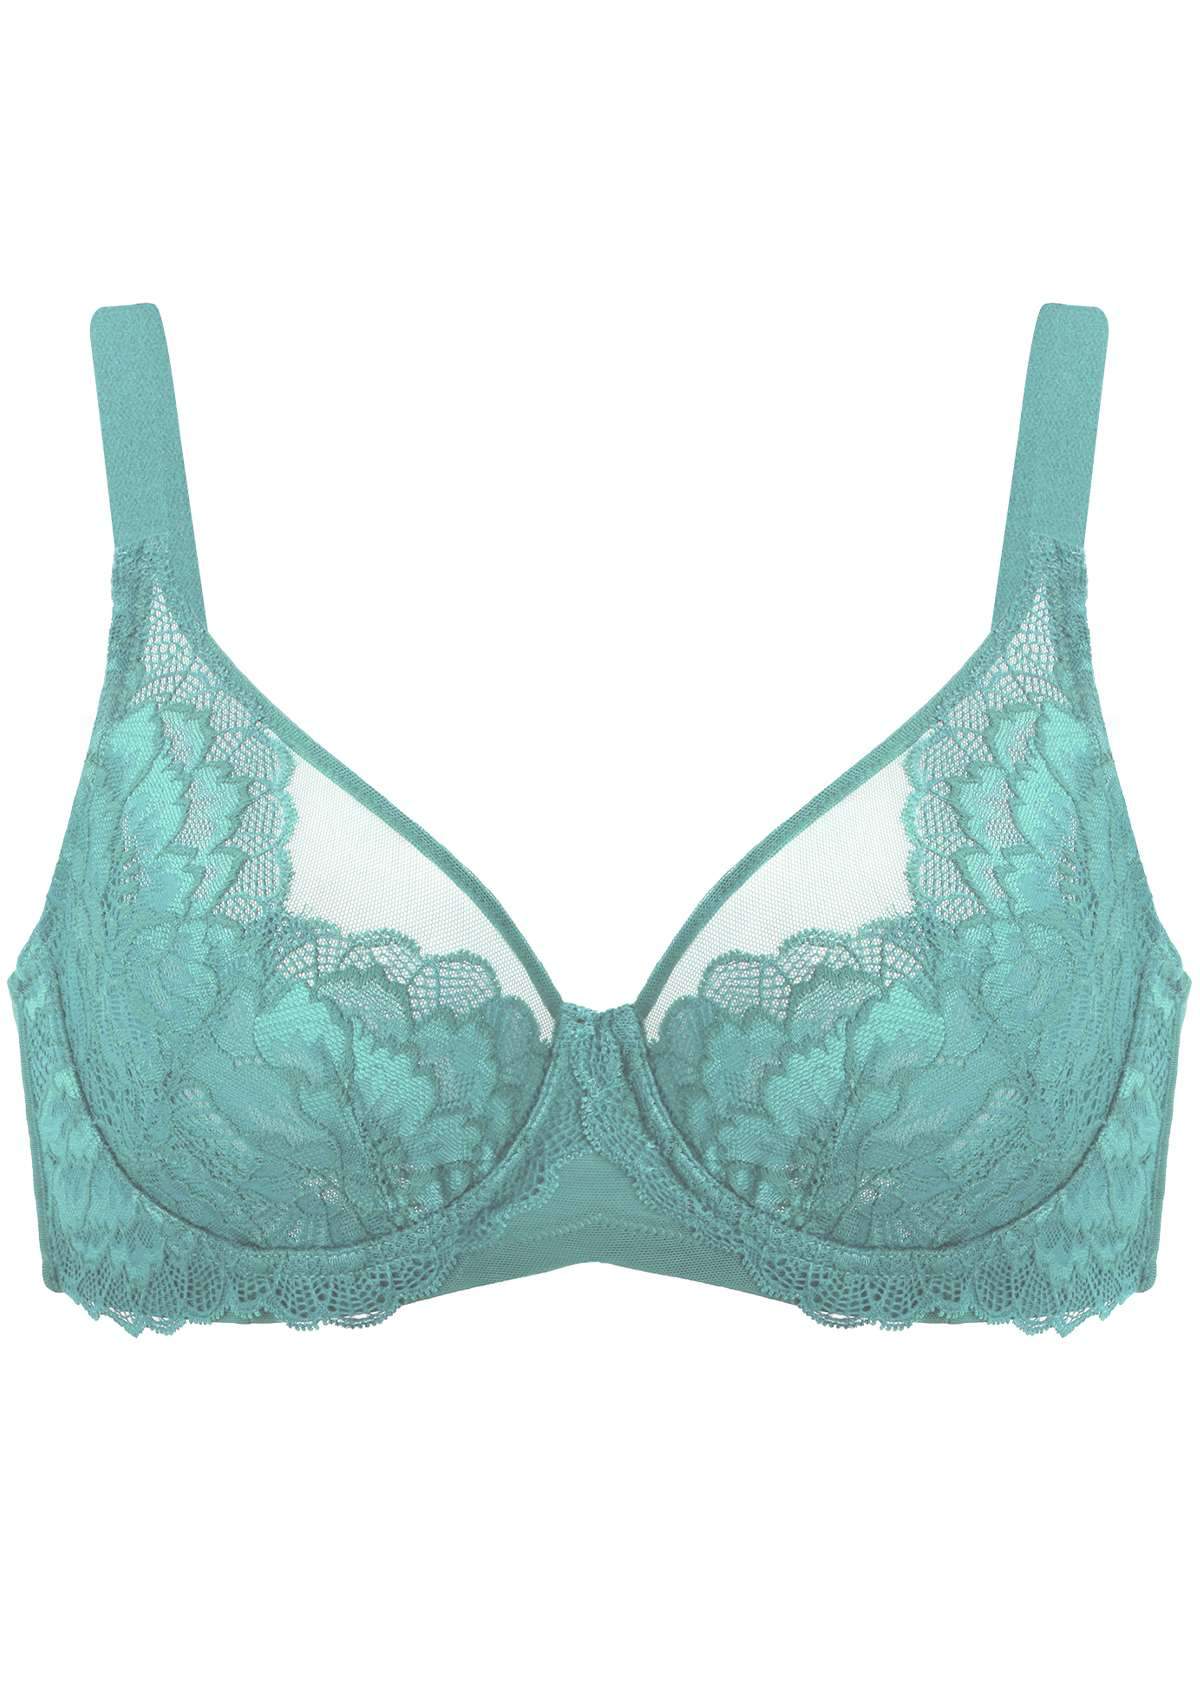 HSIA Peony Lace Unlined Supportive Underwire Bra - Green / 38 / DDD/F